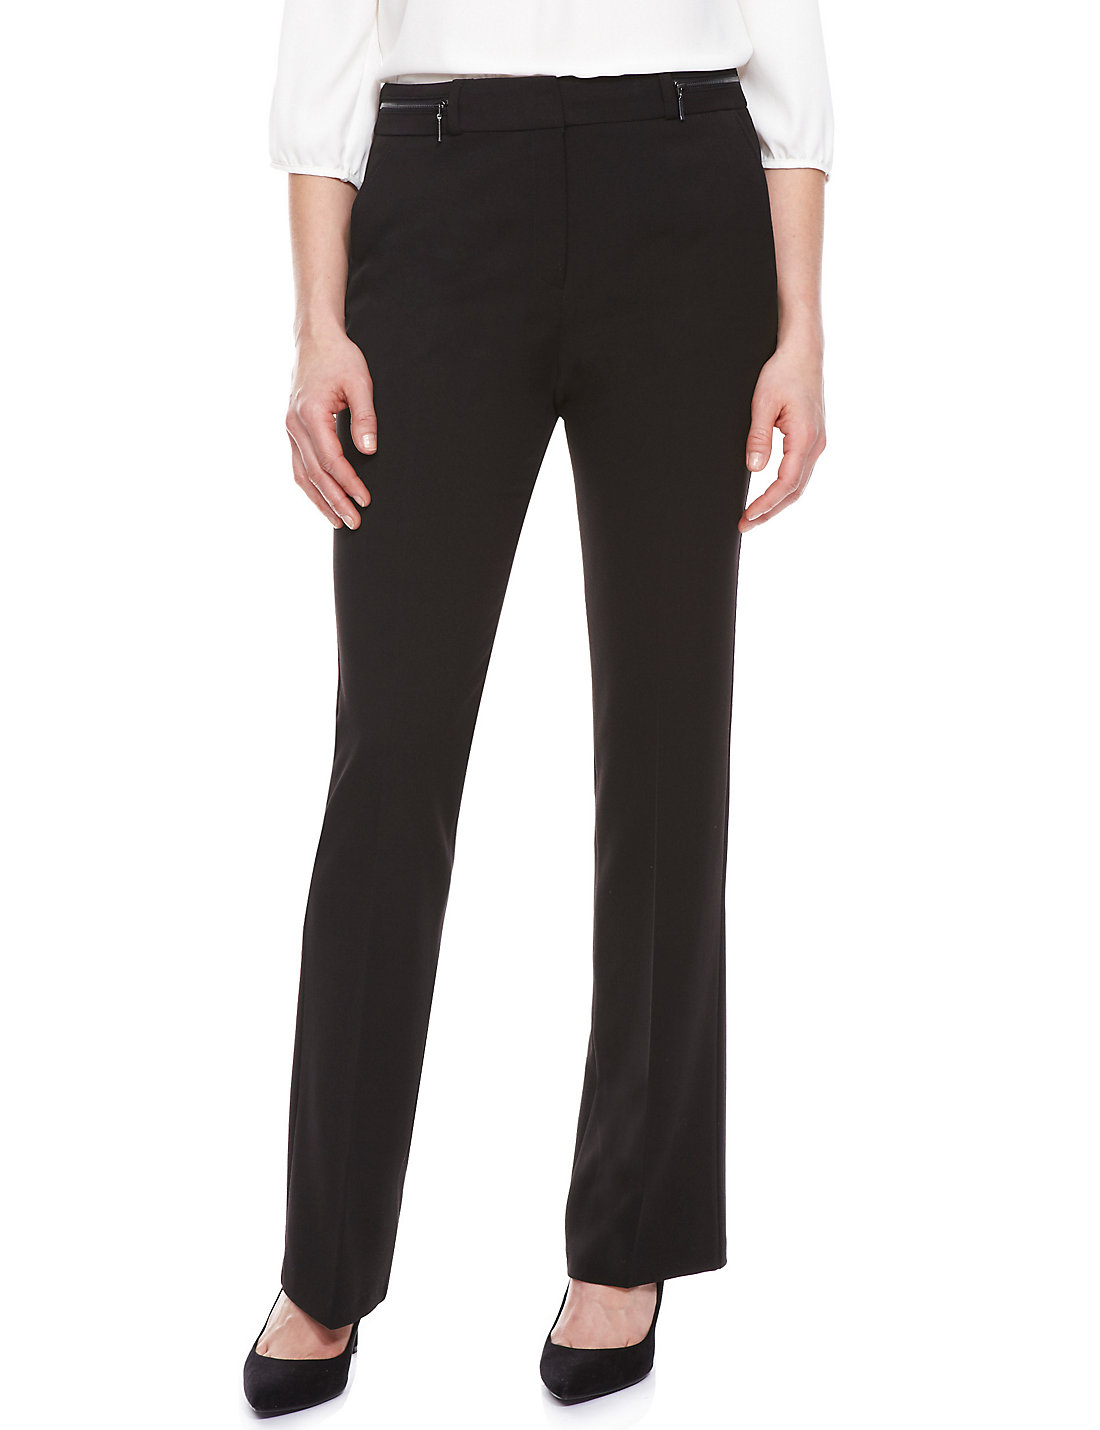 Marks and Spencer - - M&5 BLACK Zipped Waist Bootleg Trousers - Size 22 ...